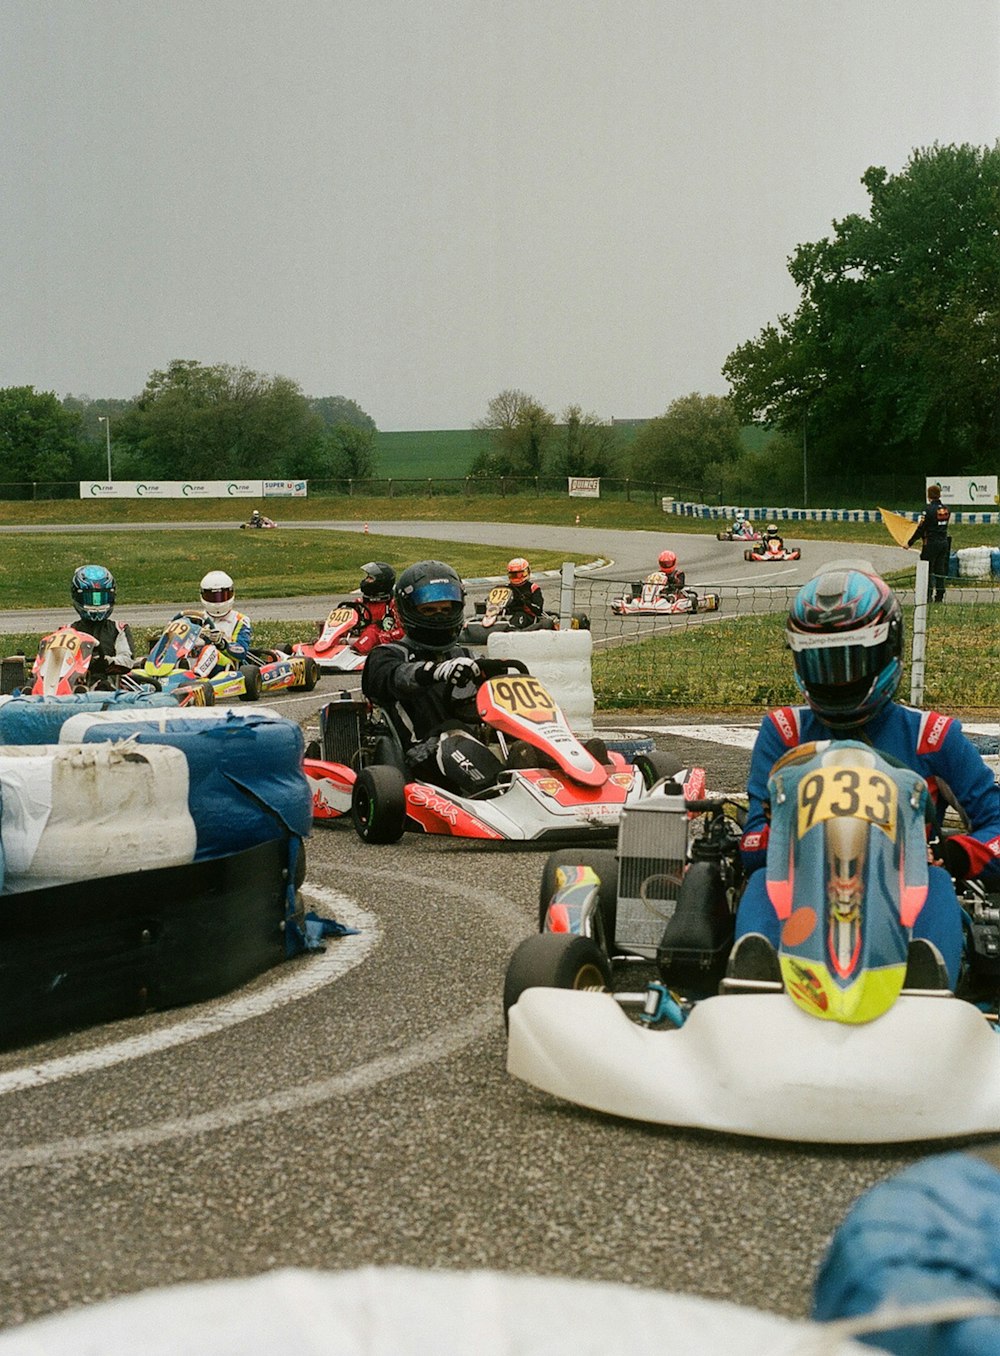 a group of people riding go karts on a track